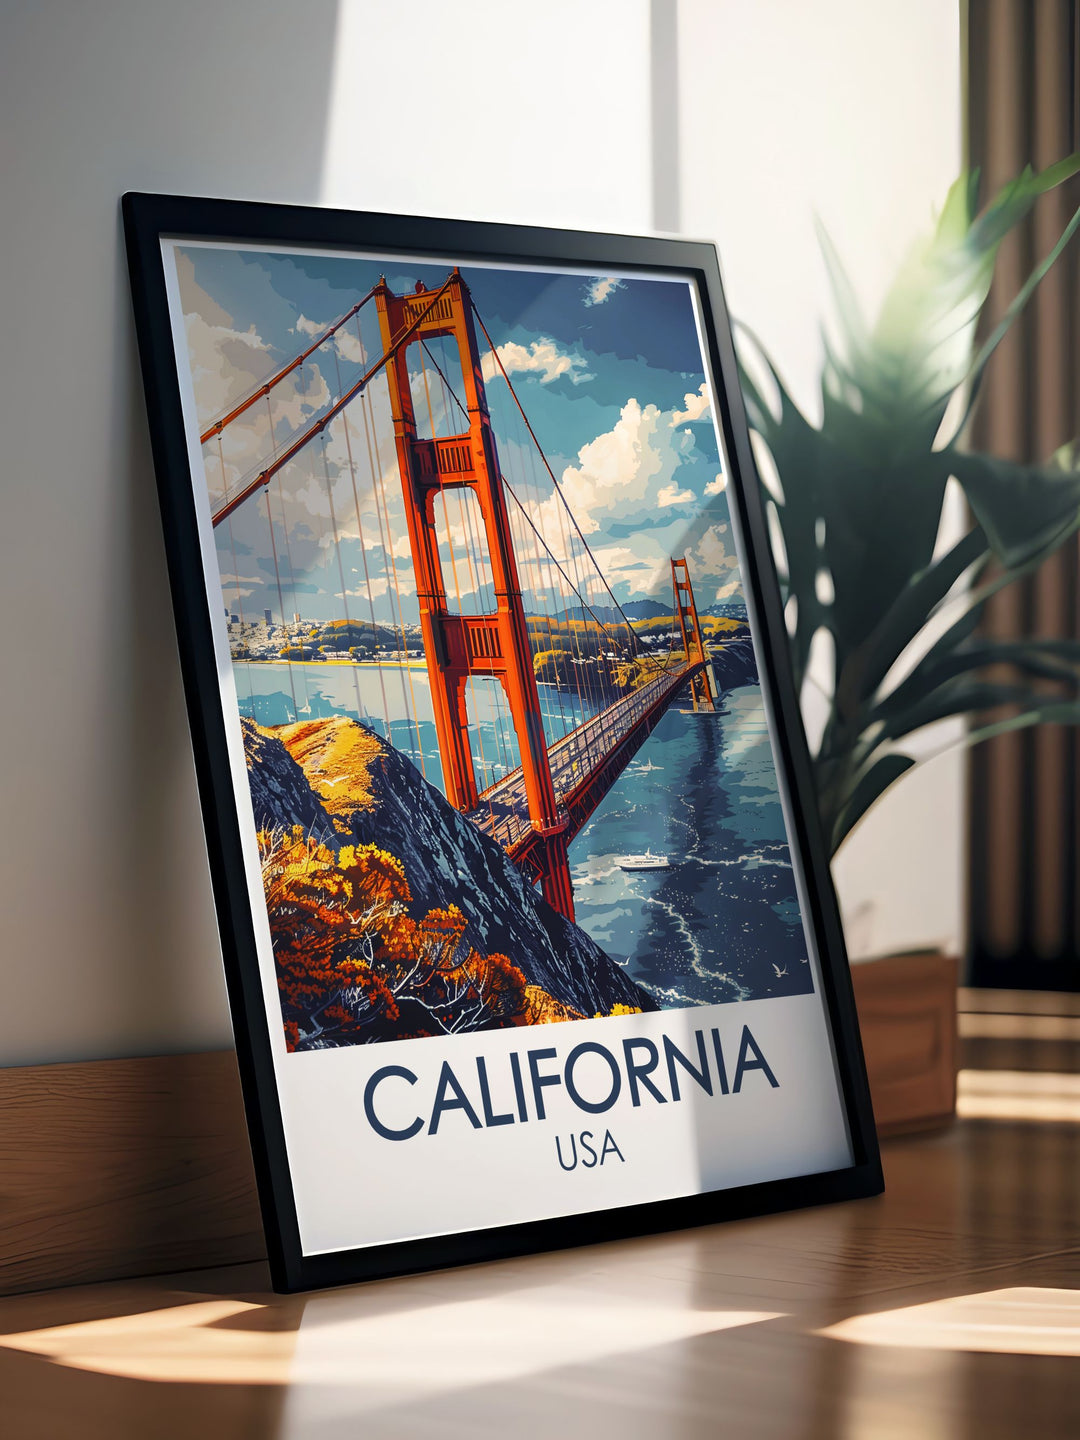 The Golden Gate Bridge is beautifully illustrated in this travel poster, highlighting its Art Deco design and the stunning views it offers of San Francisco. Ideal for those who appreciate engineering marvels and historic landmarks.